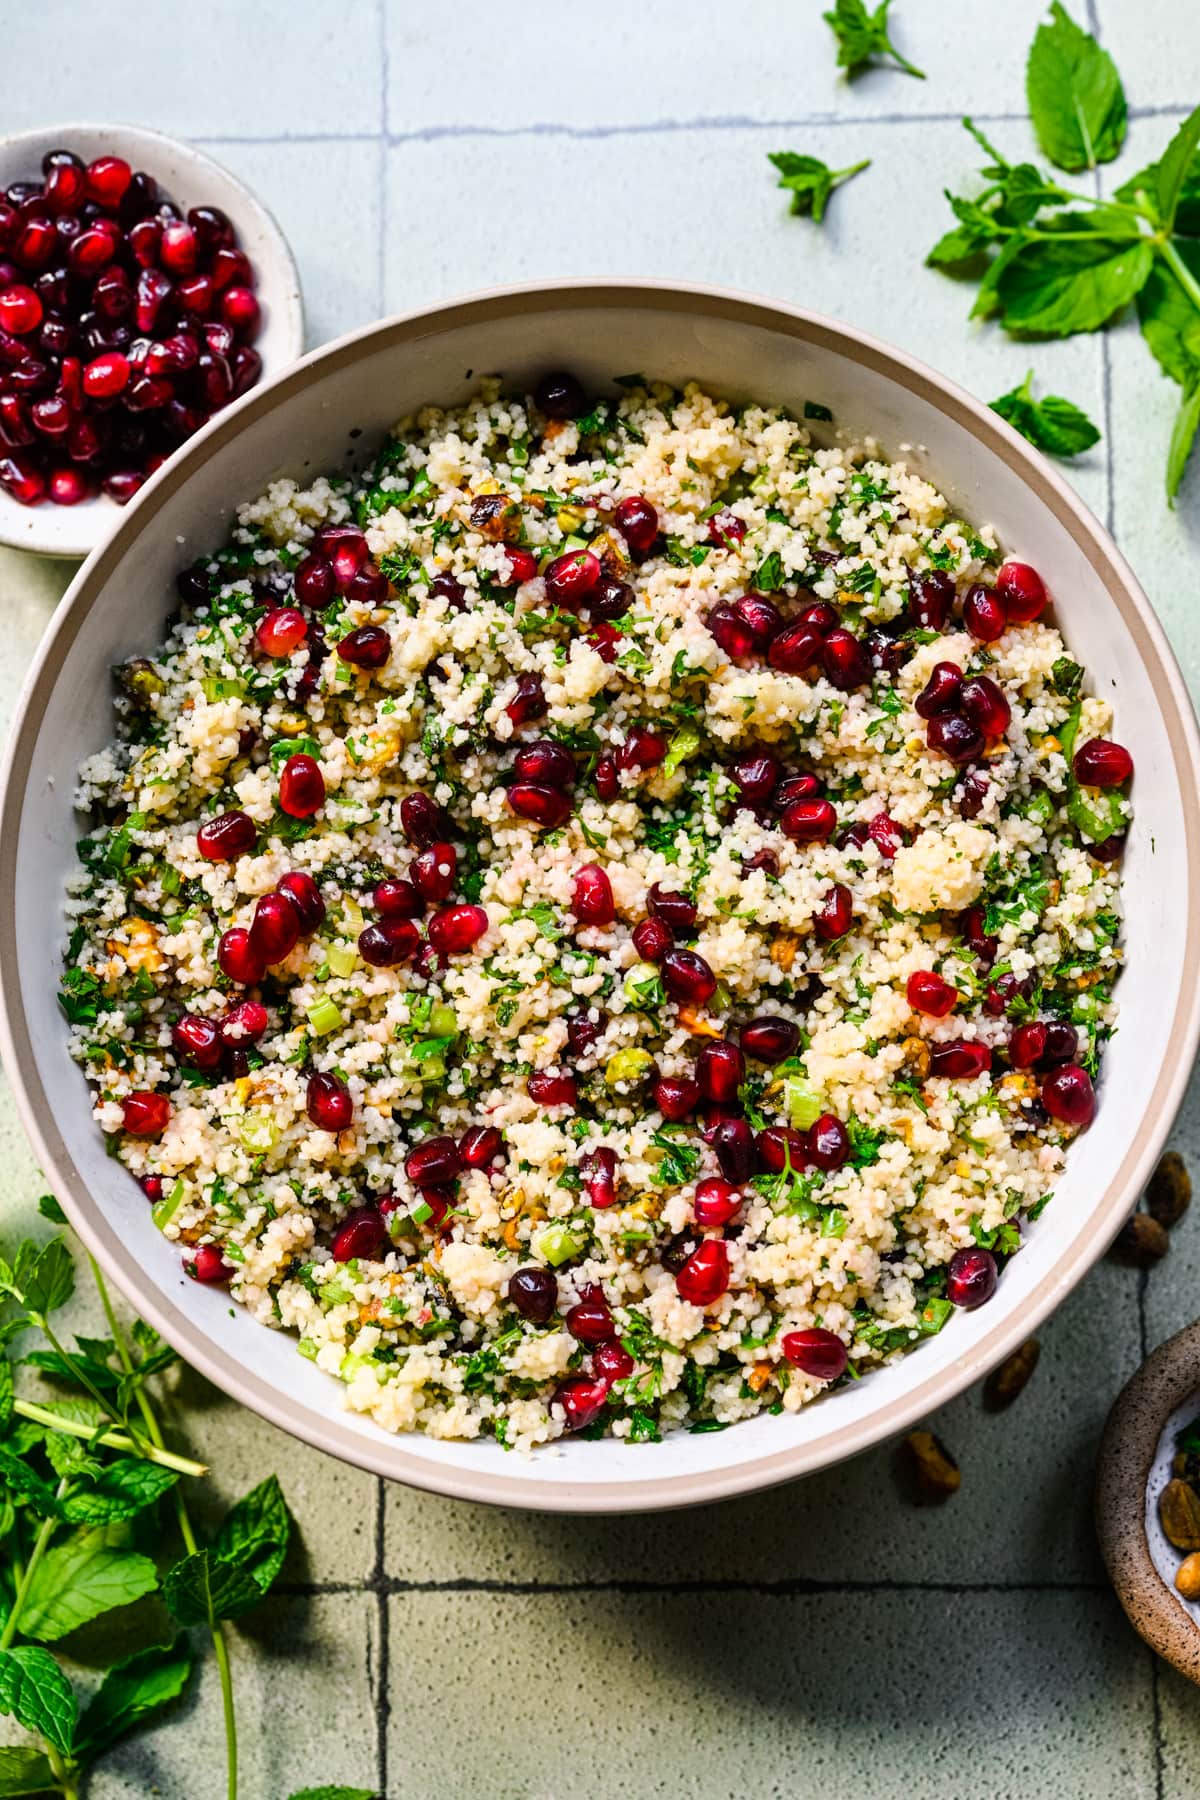 Finished pomegranate couscous salad in a white bowl.